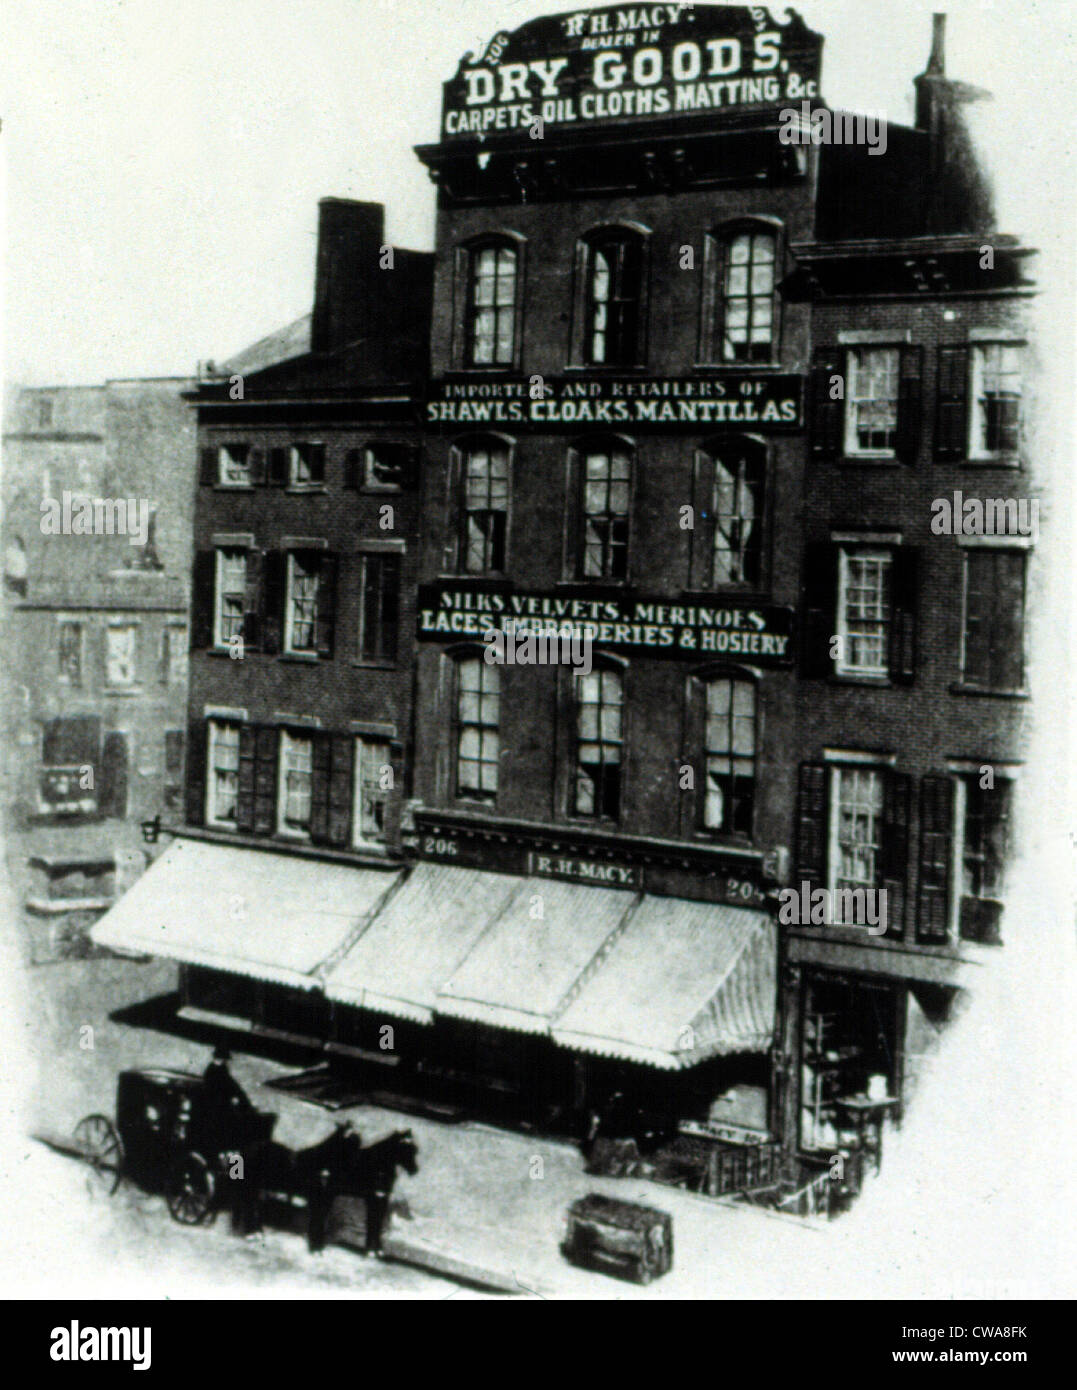 NEW YORK CITY, R.H. Macy's the first store in New York City, 1869.. Courtesy: CSU Archives / Everett Collection Stock Photo